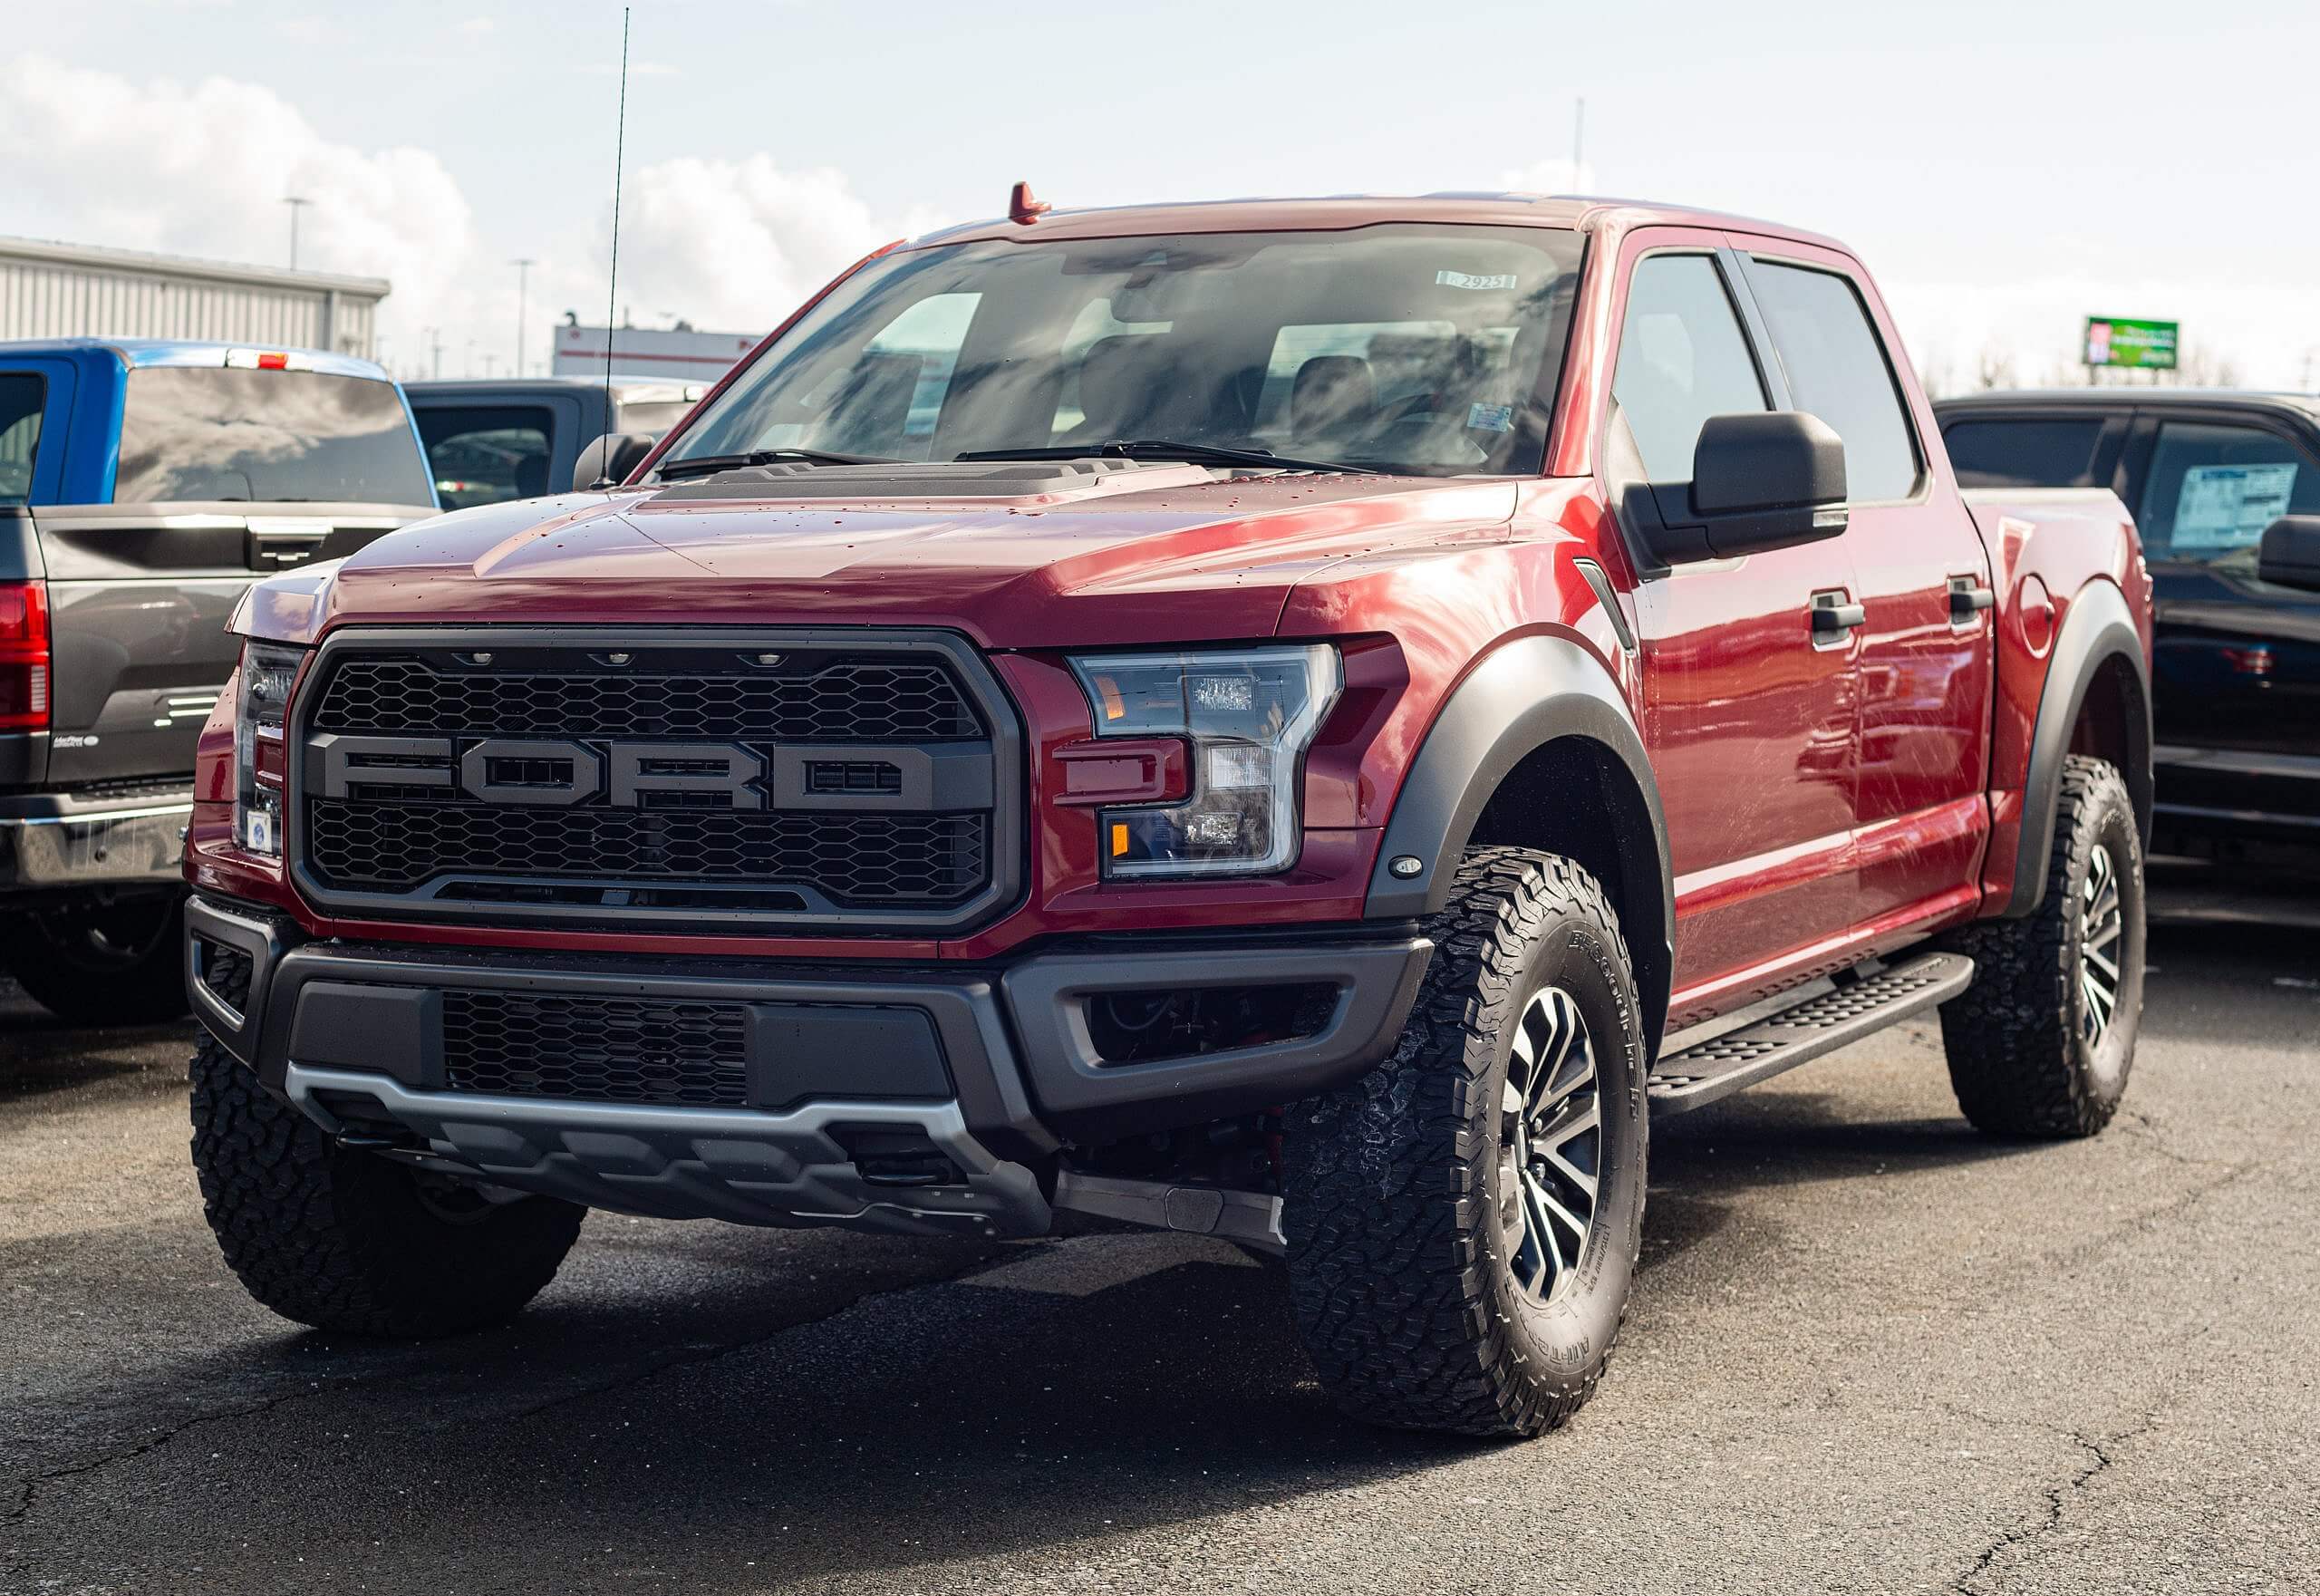 Engine and Transmission Issues in the Ford F-150’s - TheLemonFirm.com